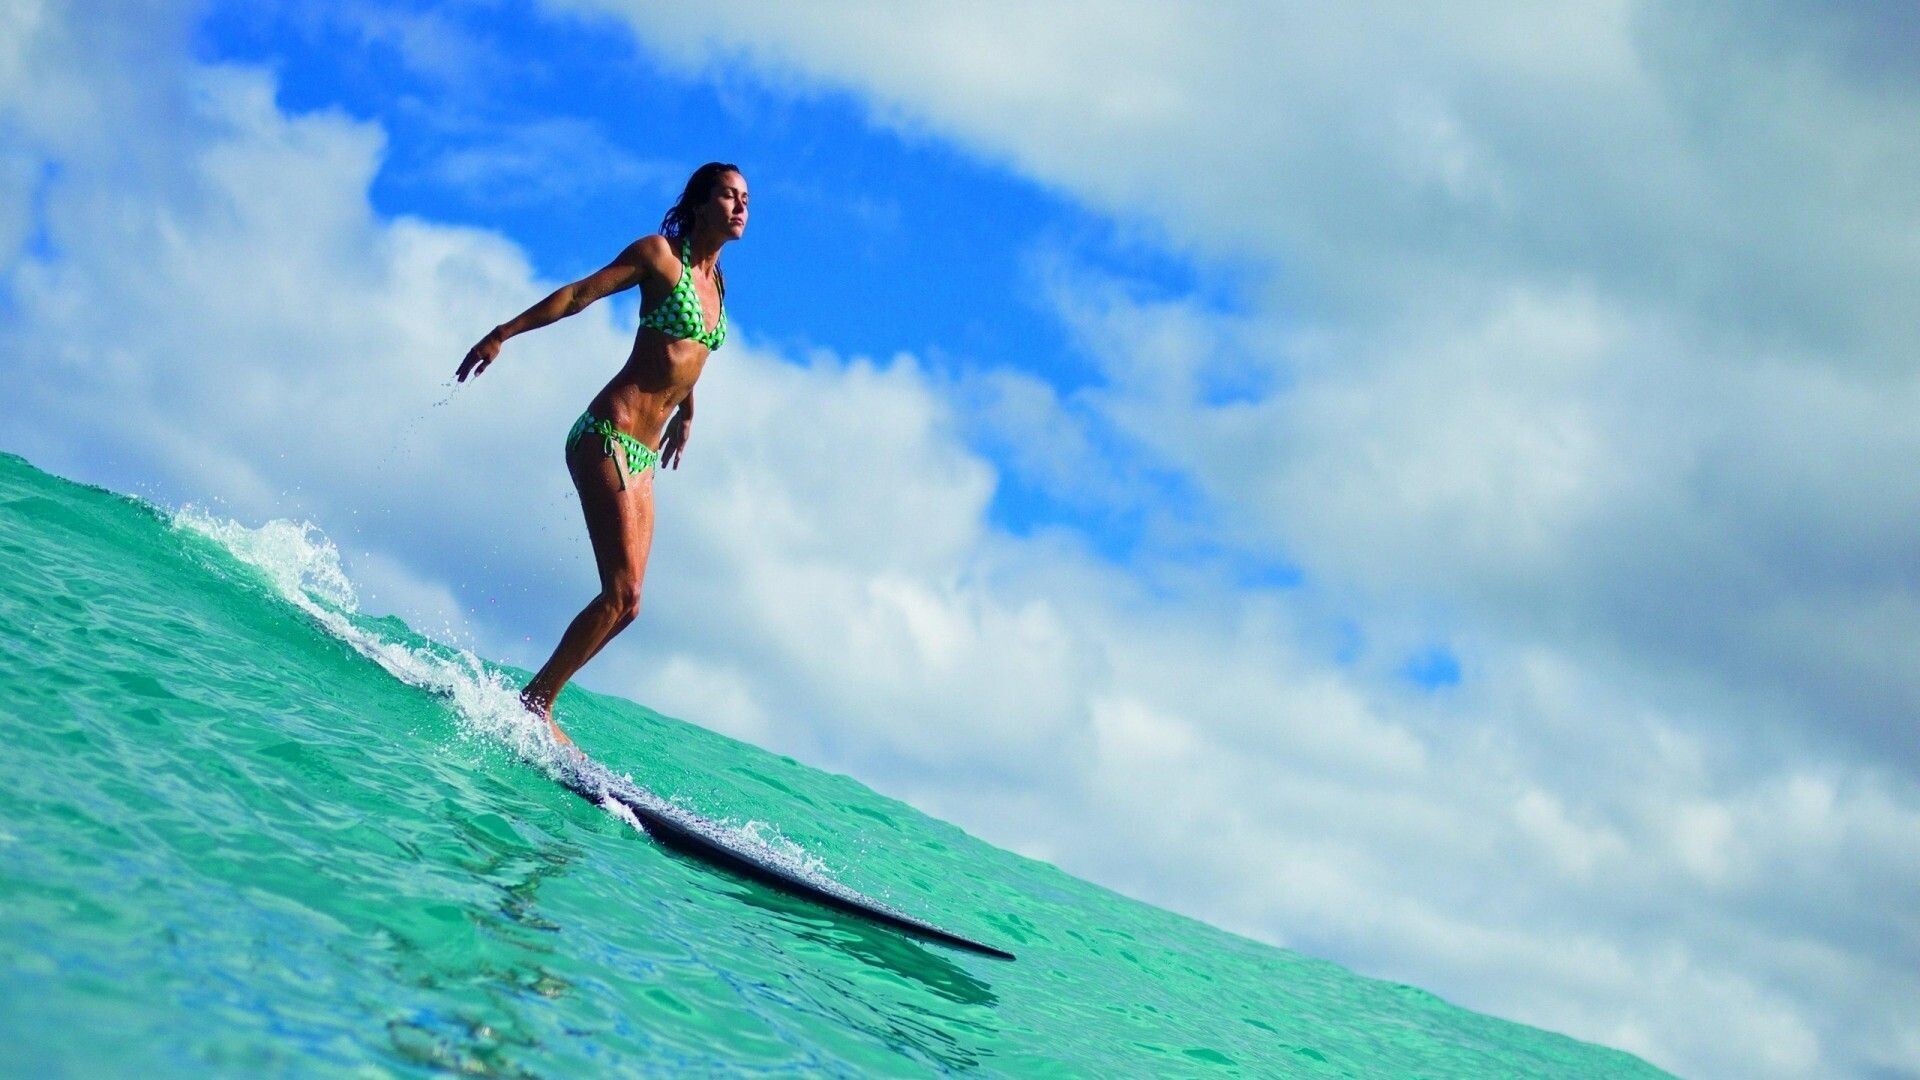 Girl Surfing: Women using a surfboard, Shortboarding performance by a woman athlete. 1920x1080 Full HD Wallpaper.